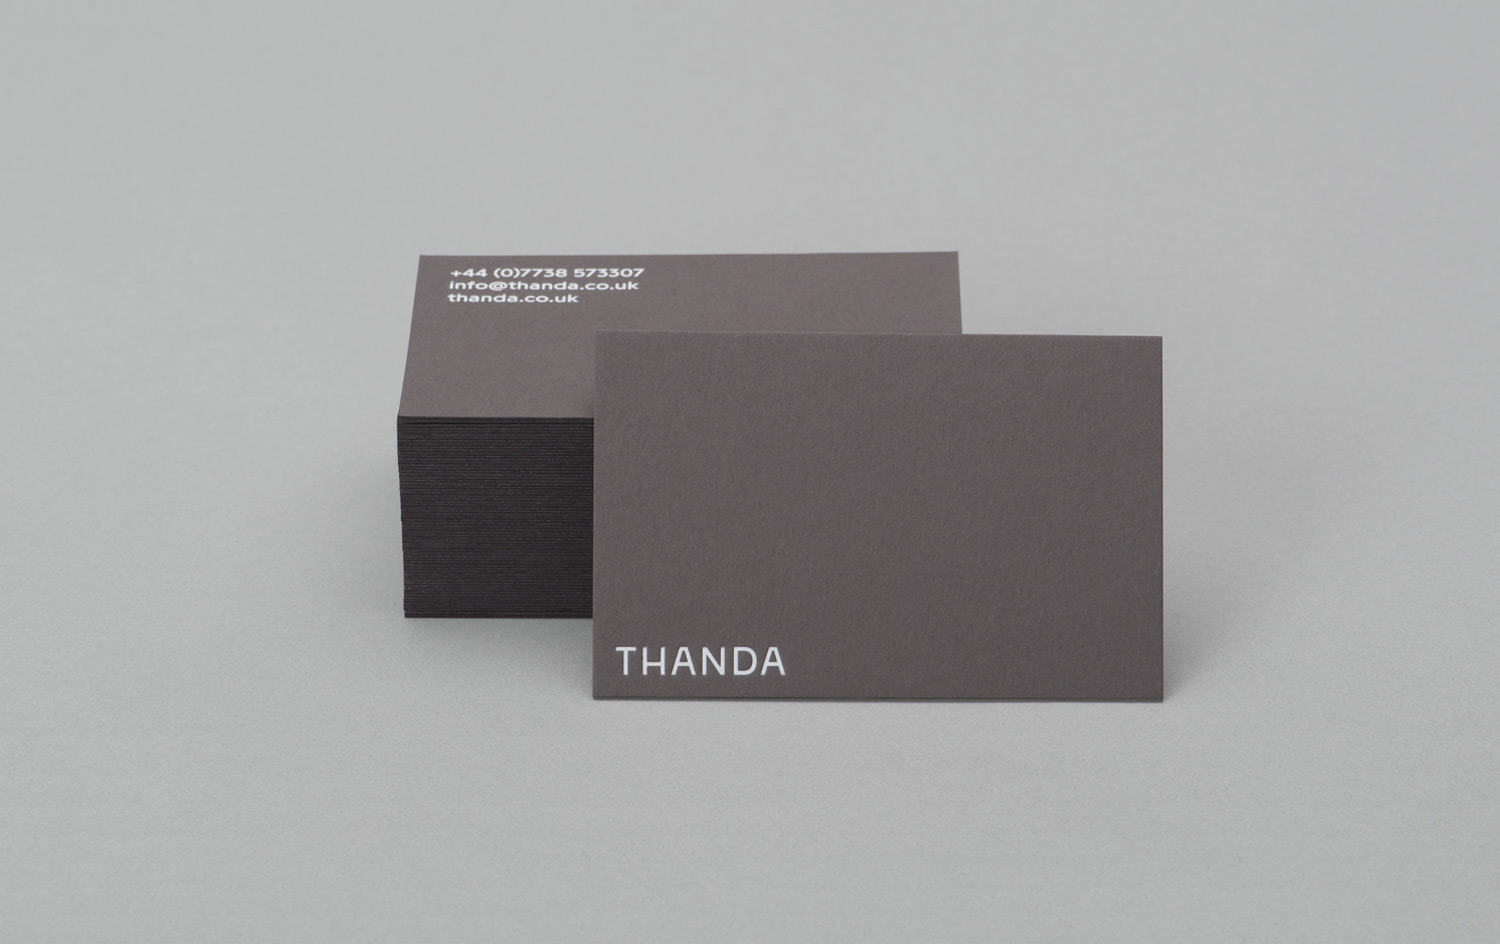 Brand identity and white foiled business cards by UK graphic design studio Karoshi for conscientious interior accessory business Thanda